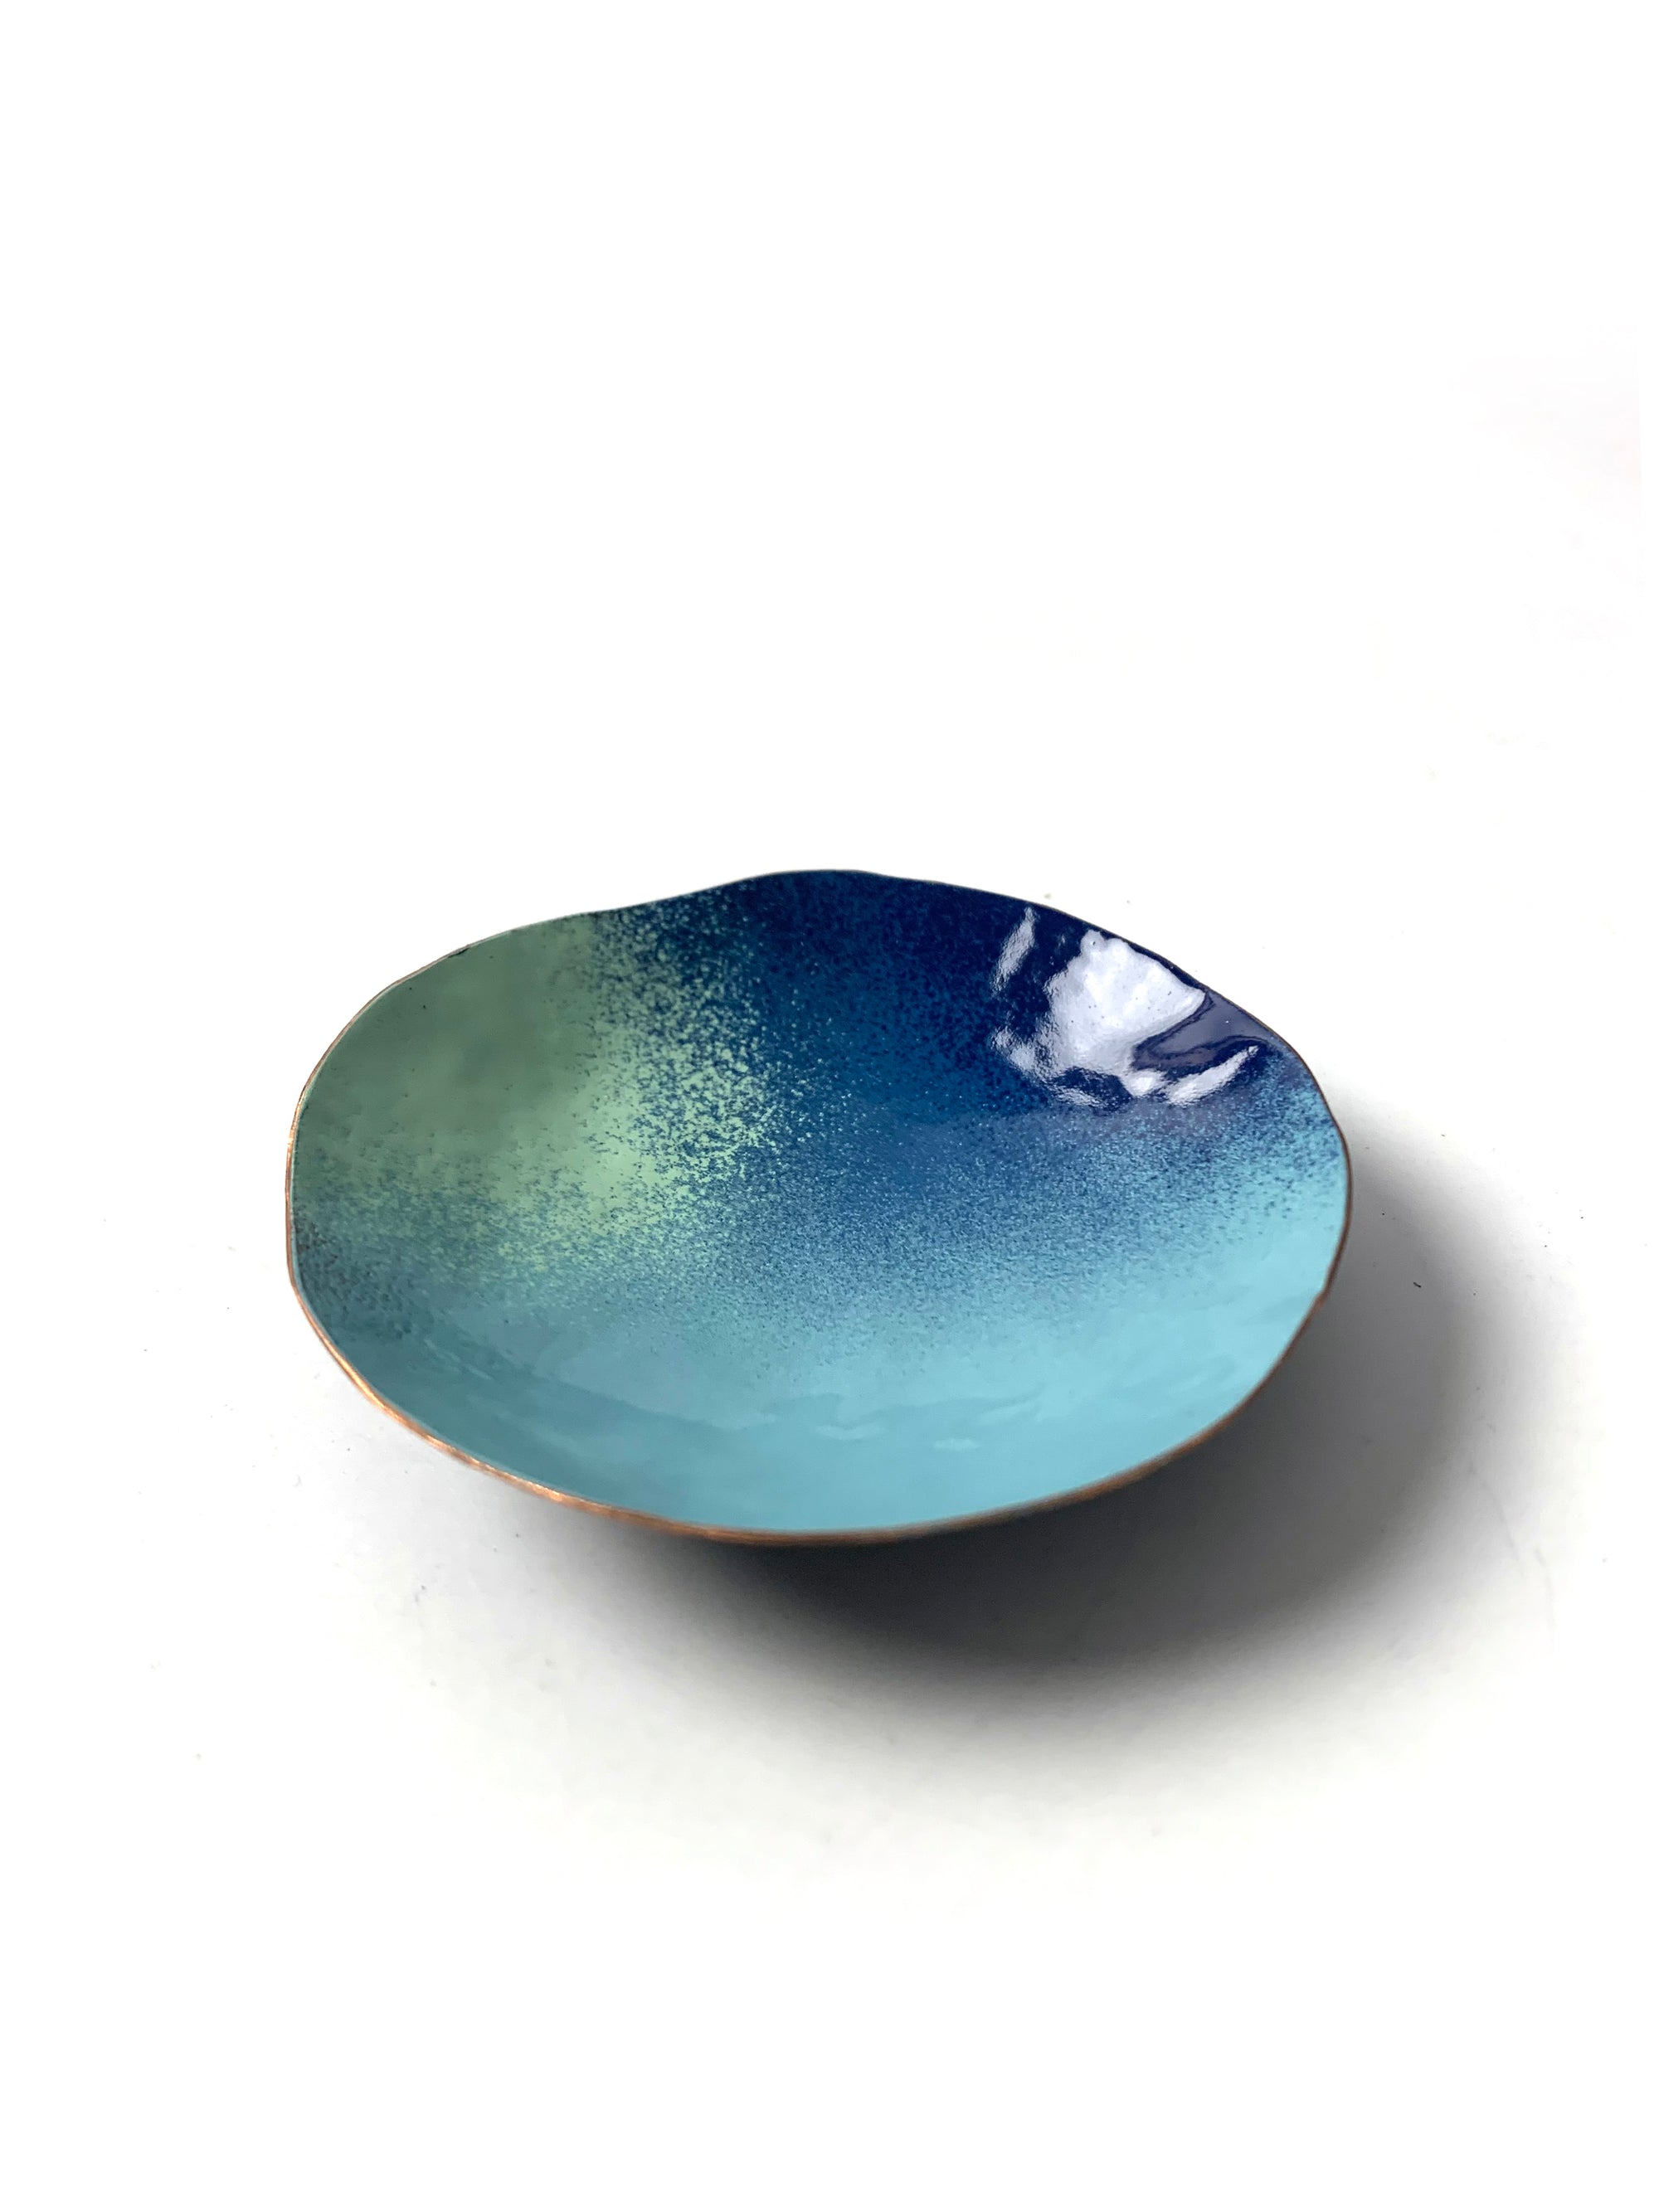 Little Copper Dish in Faded Teal and Azure Blue